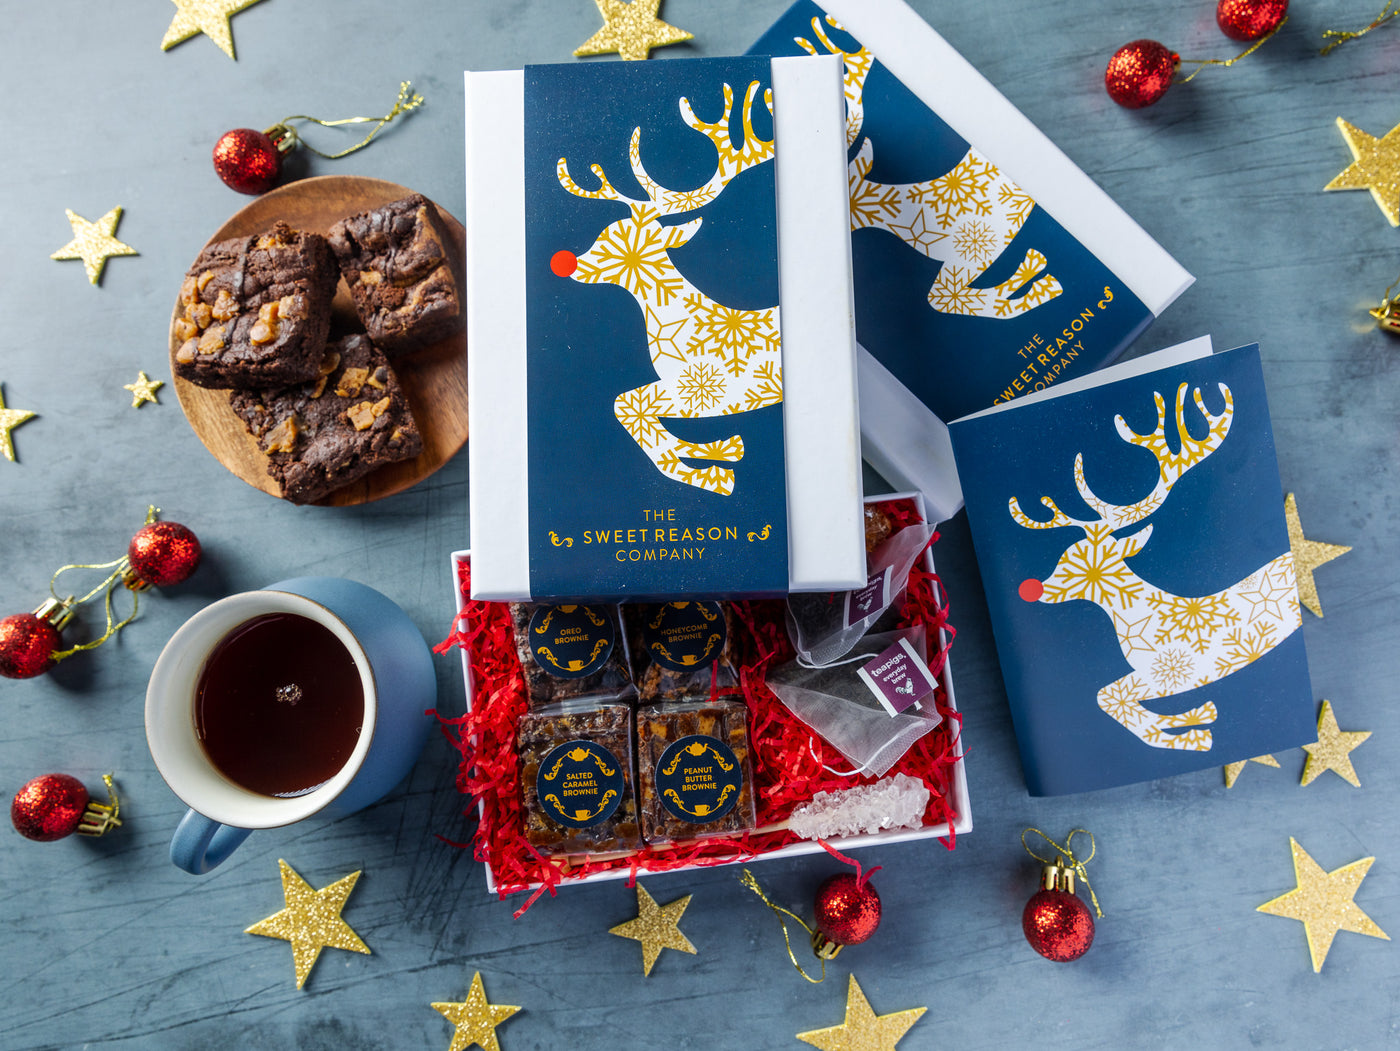 'Reindeer' Afternoon Tea for Two